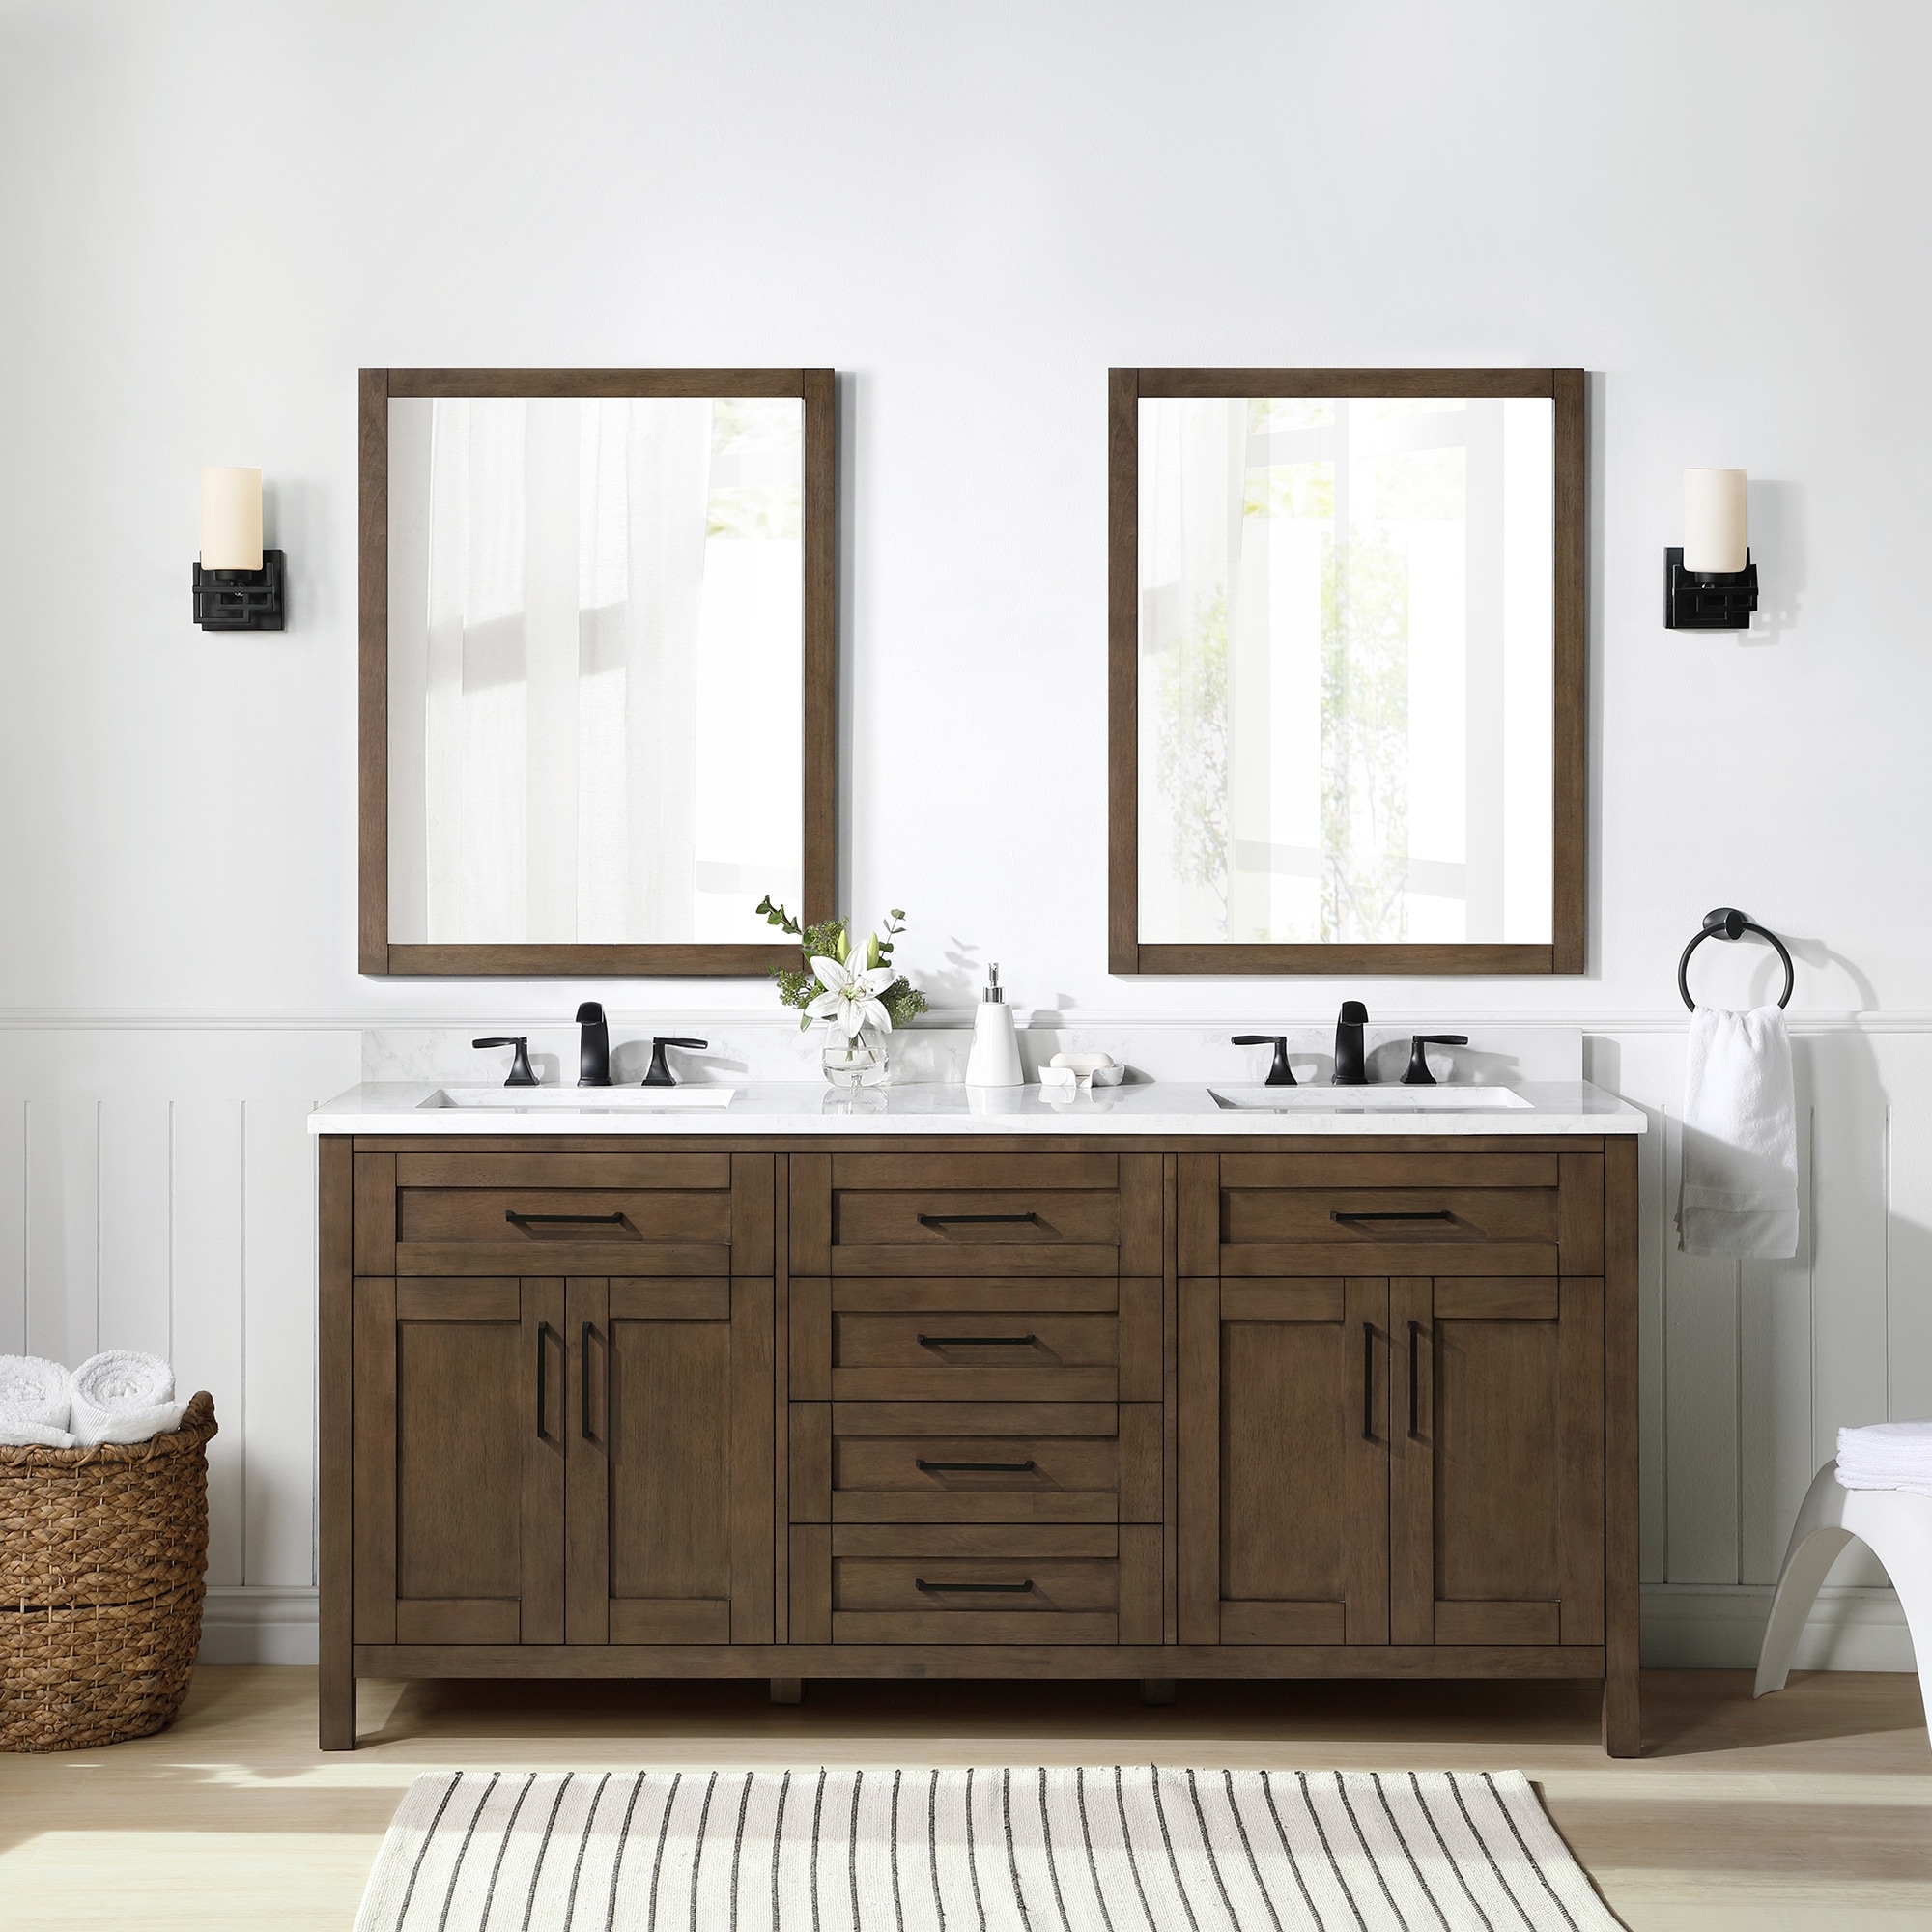 OVE Decors Tahoe 72 in. Almond Latte Vanity with 2 Mirrors ...